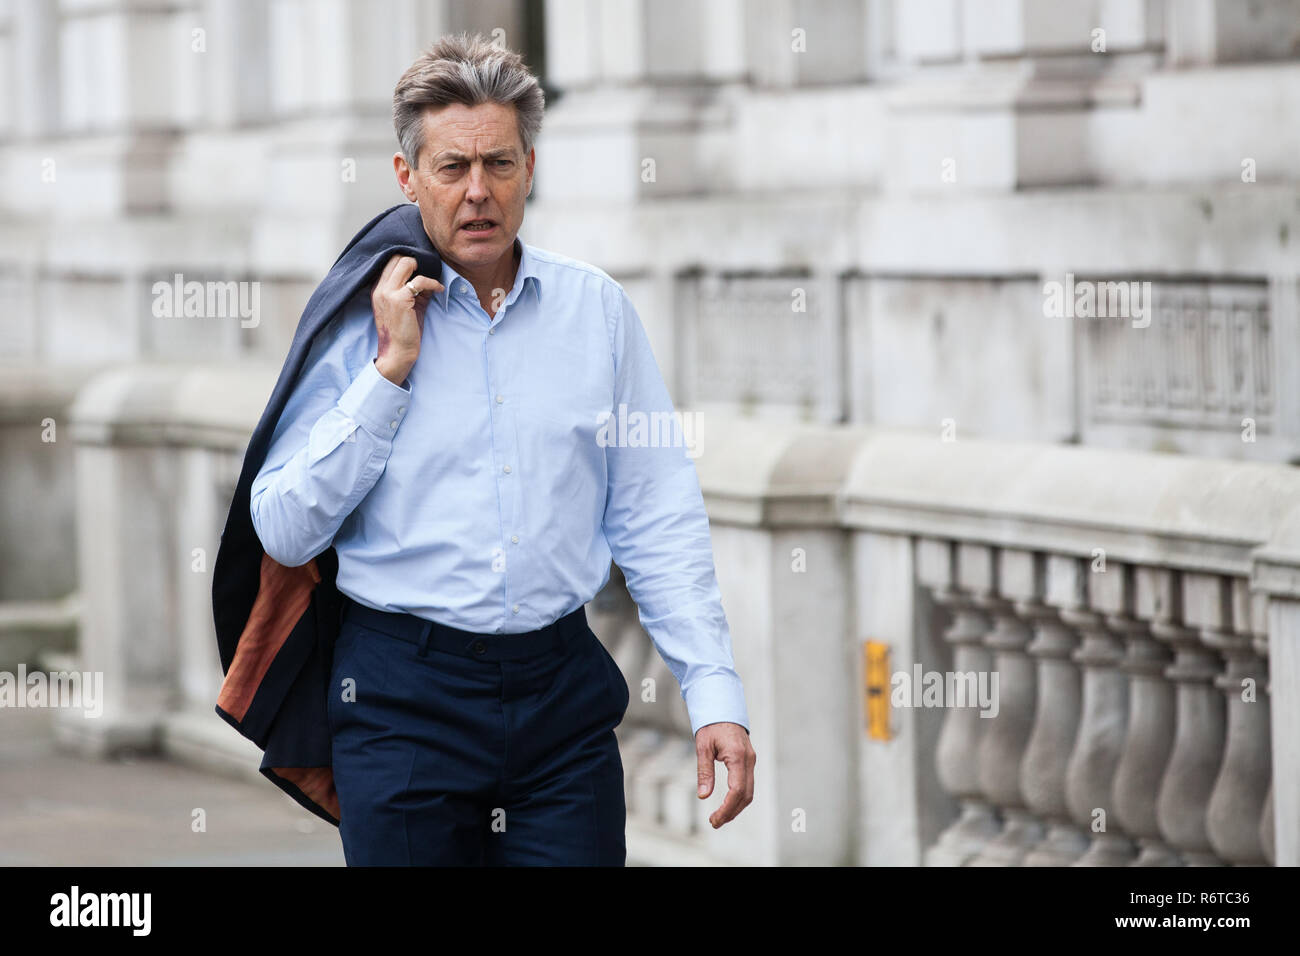 London, UK. 6th December, 2018. Ben Bradshaw, Labour MP for Exeter, arrives for a Privy Council meeting at the Cabinet Office. Credit: Mark Kerrison/Alamy Live News Stock Photo